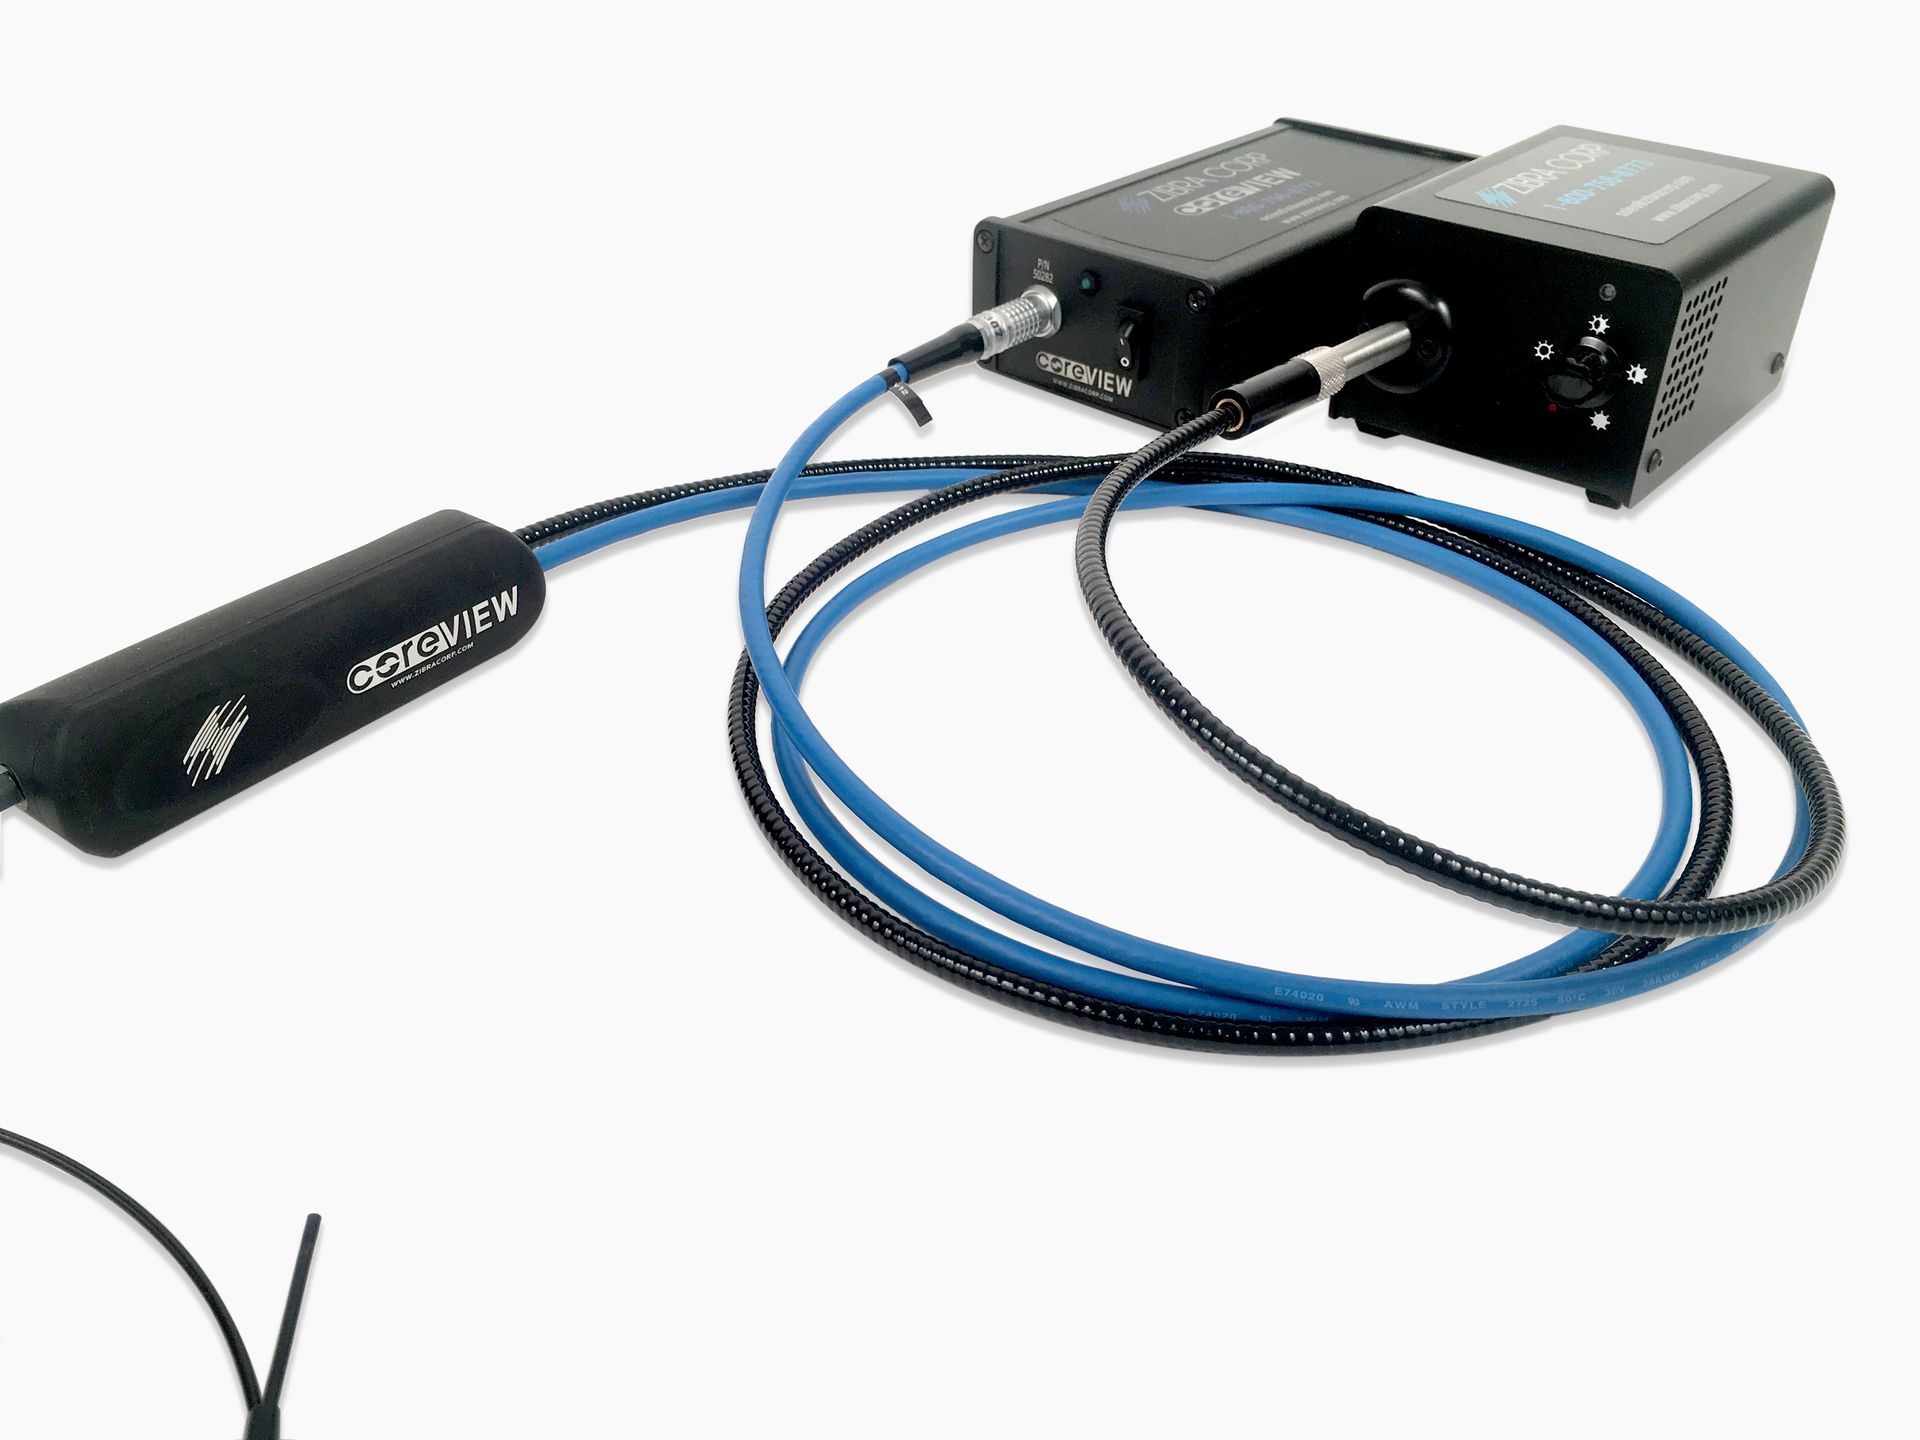 A device with a blue cord and a black box that says ' kingston ' on it